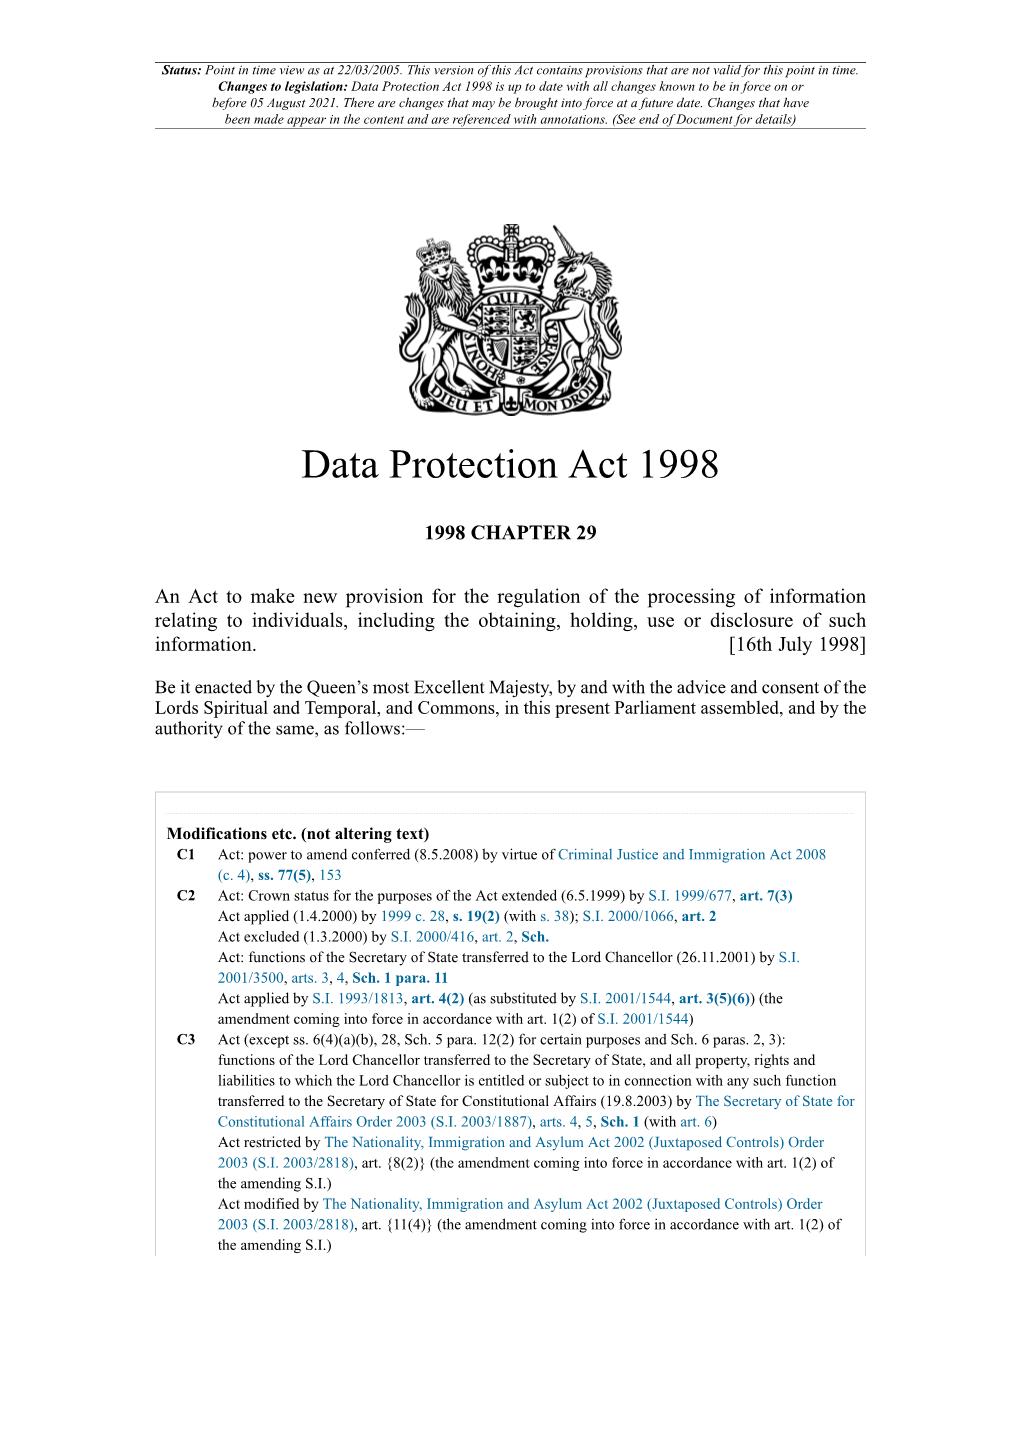 Data Protection Act 1998 Is up to Date with All Changes Known to Be in Force on Or Before 05 August 2021